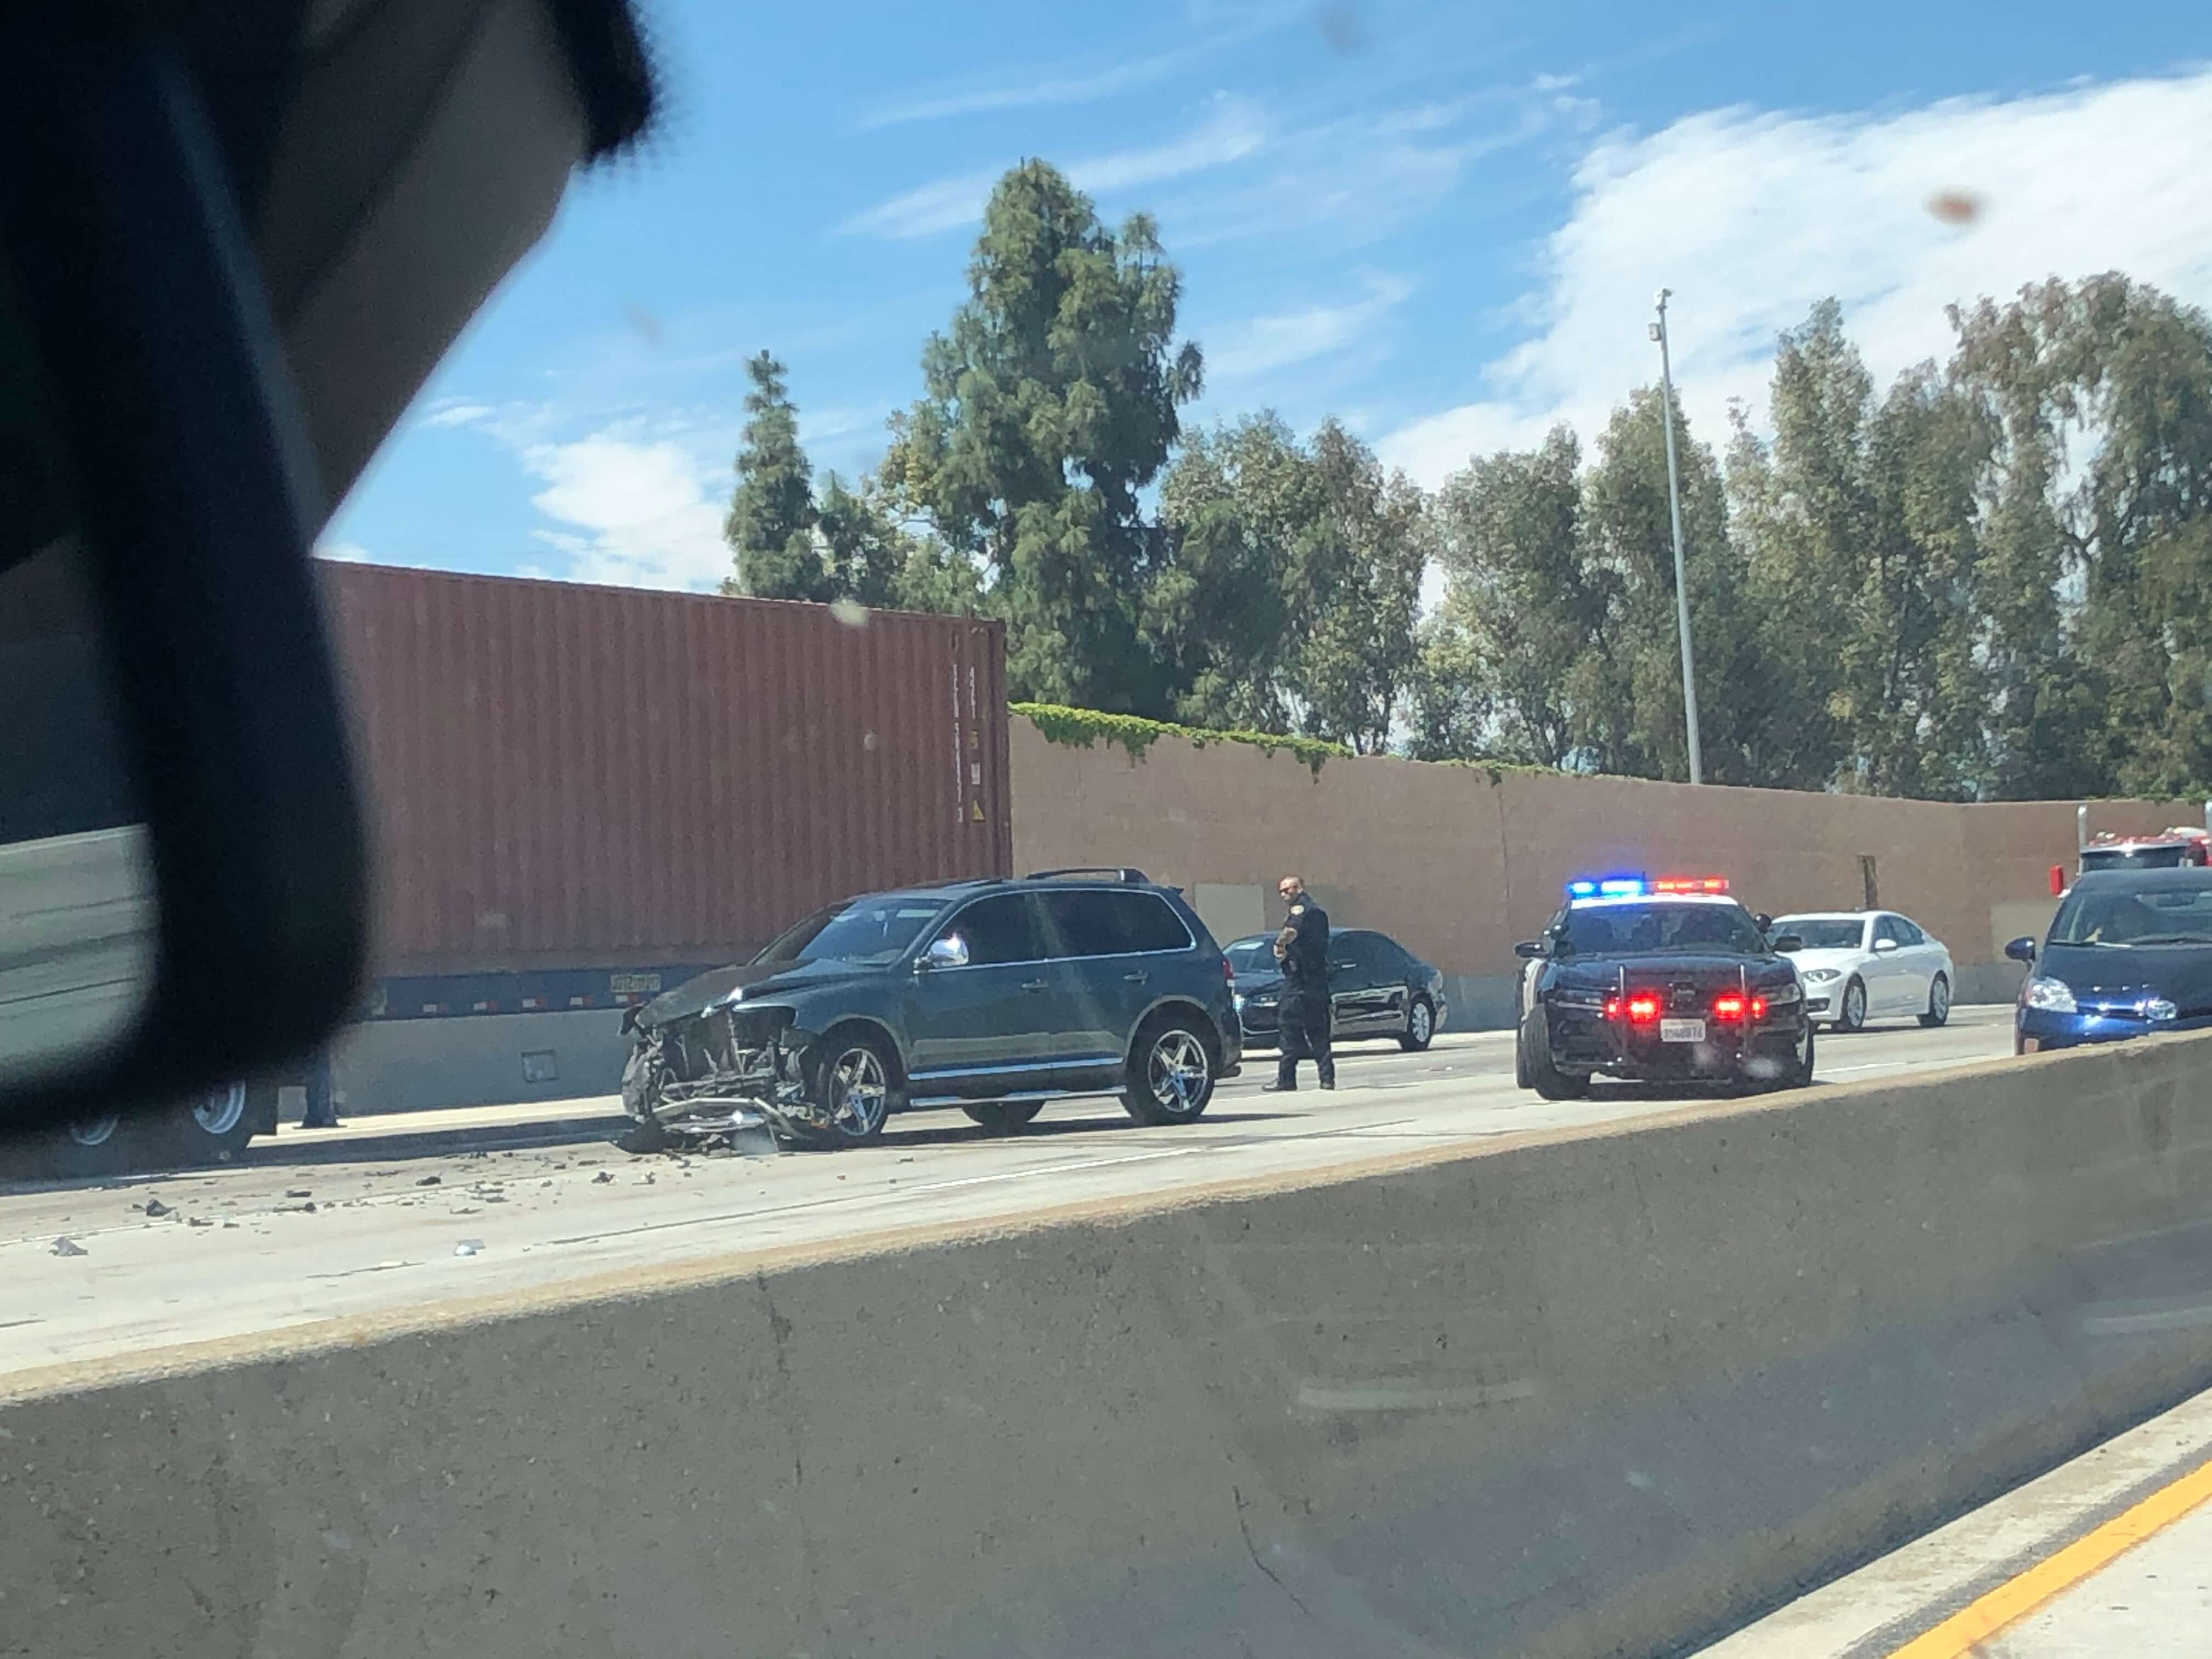 Serious injury front end damage to SUV on 405 freeway. Photo taken by Ehline Law Firm's Michael Ehline